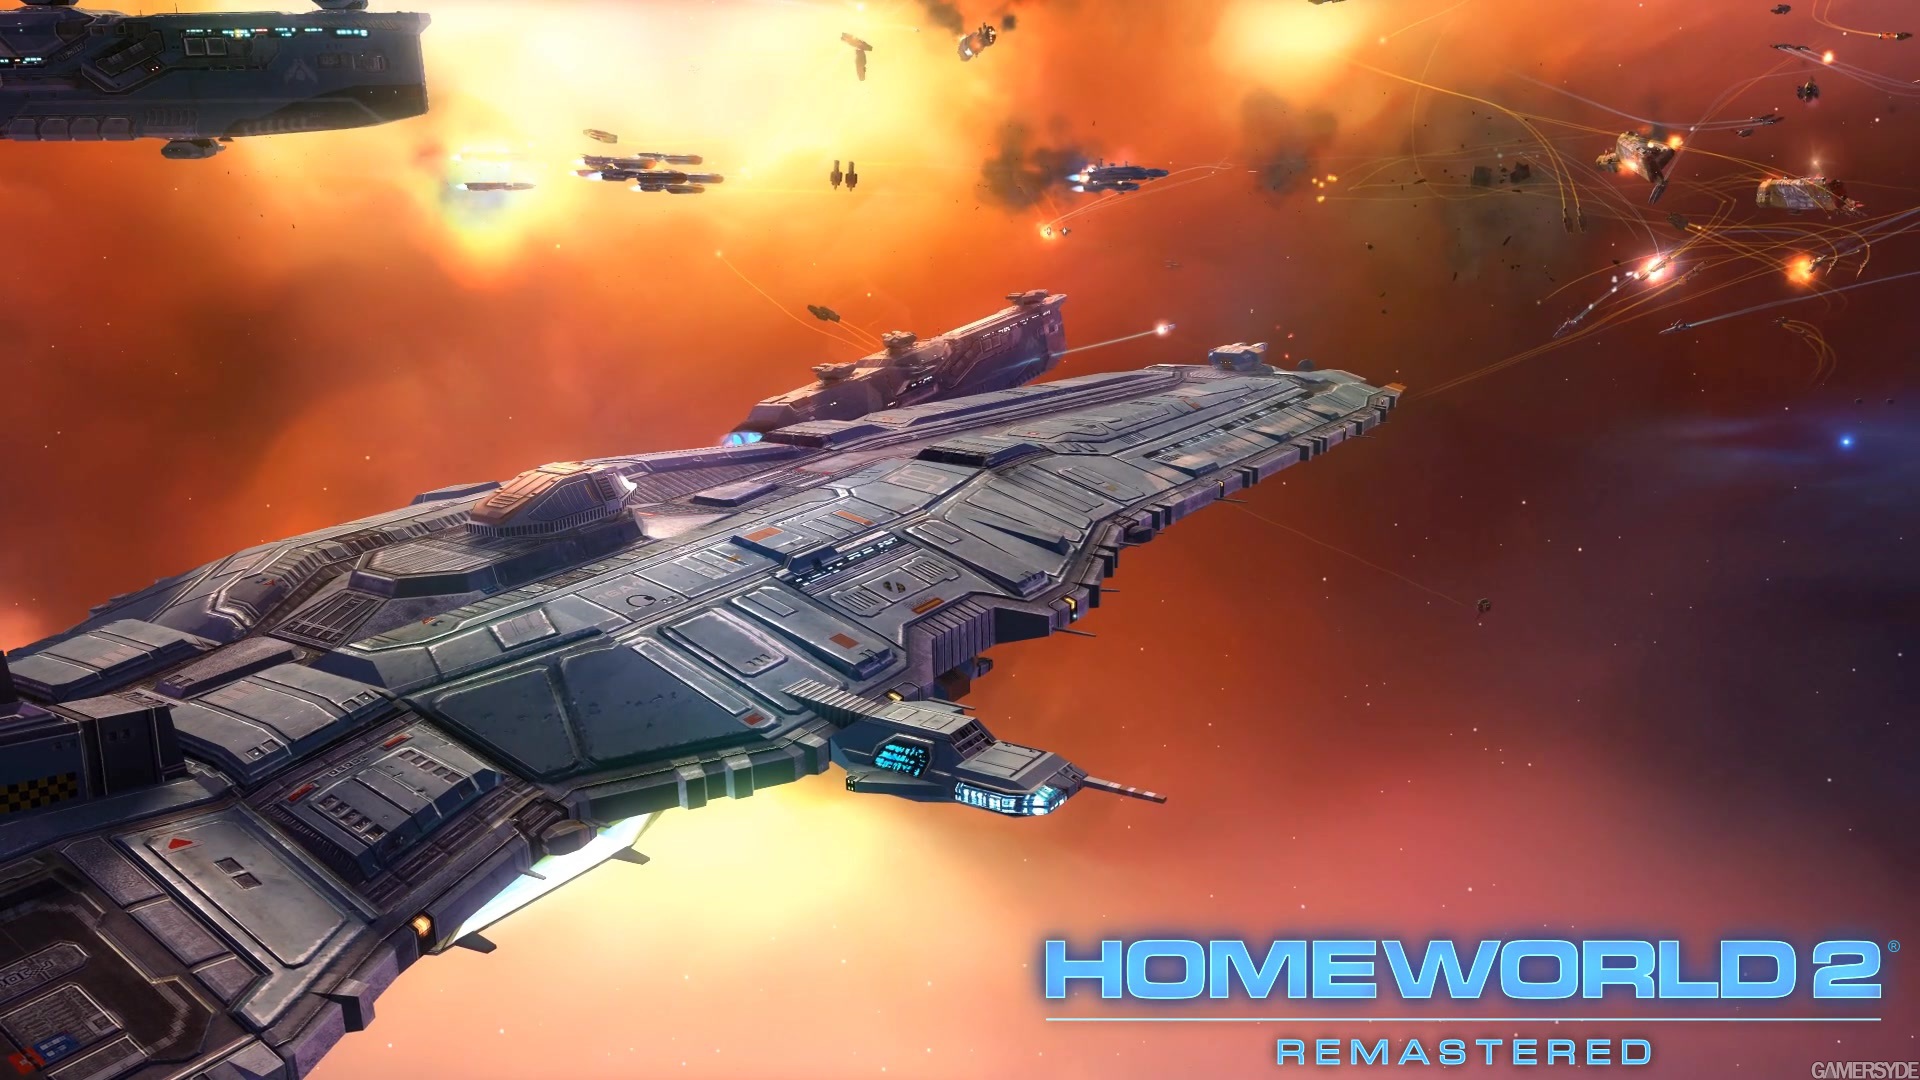 homeworld remastered collection discounts